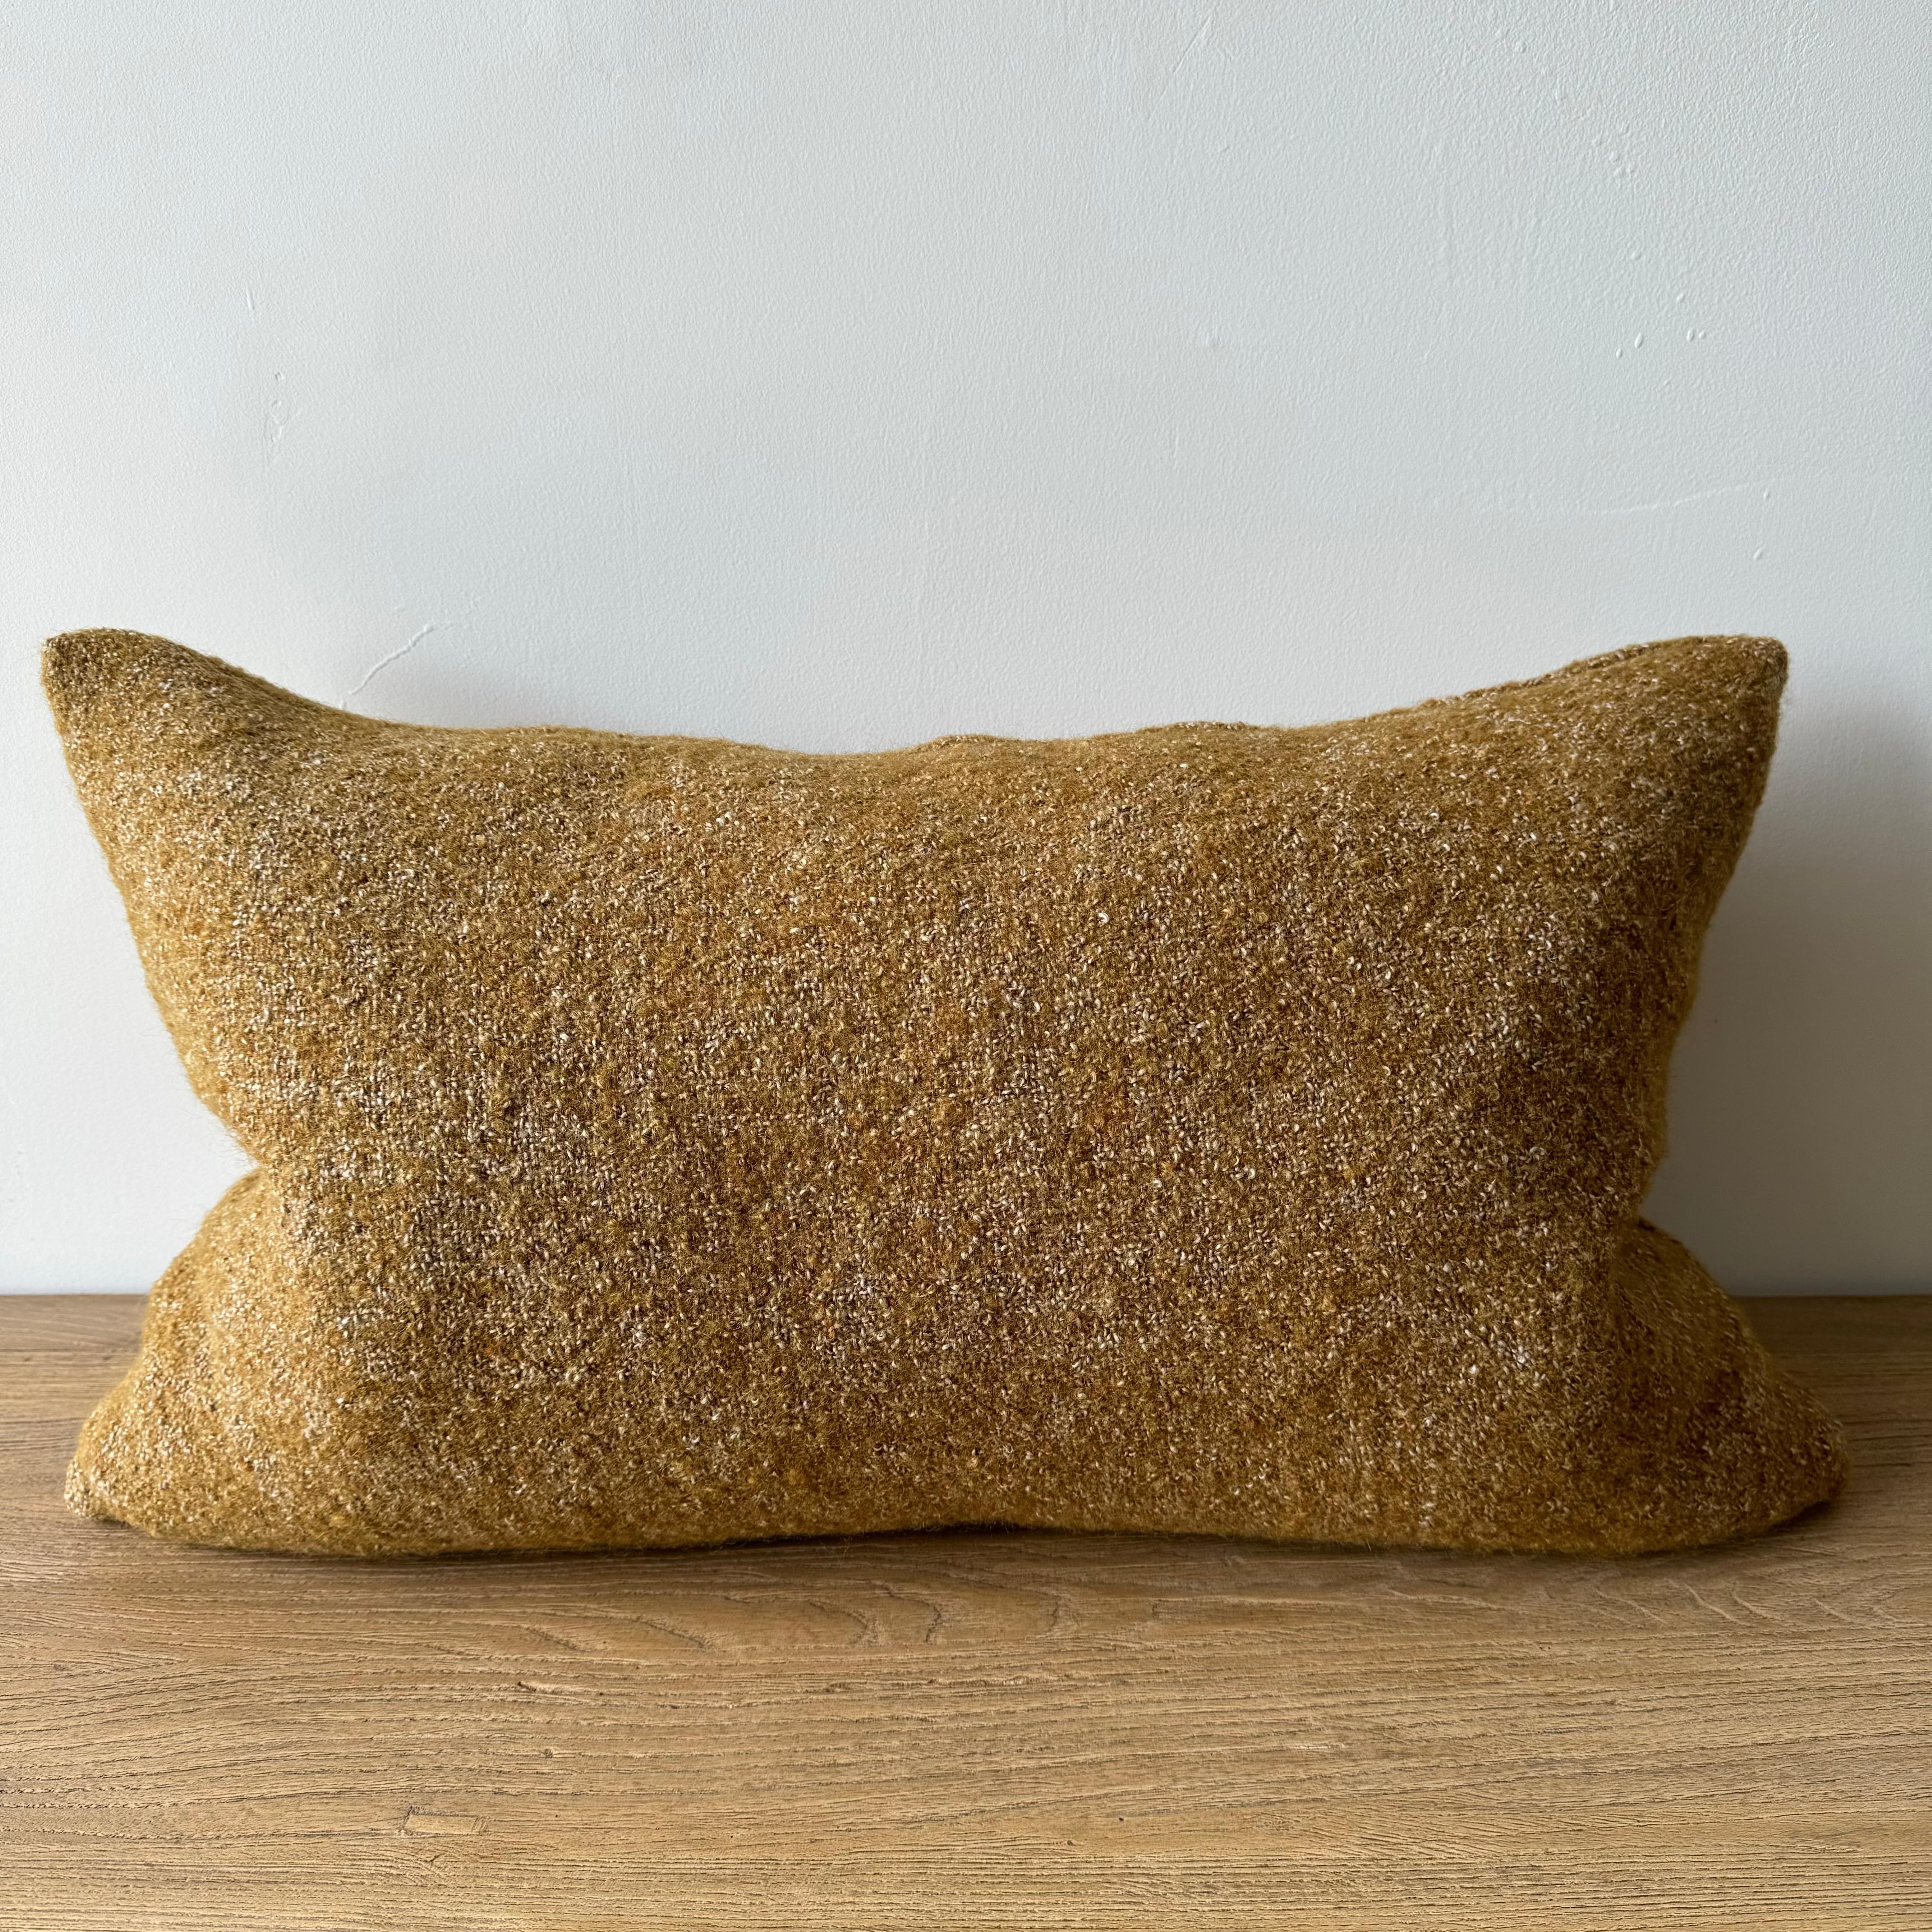 Custom Linen and Wool Lumbar Pillow in Ginger with Down Feather Insert For Sale 1